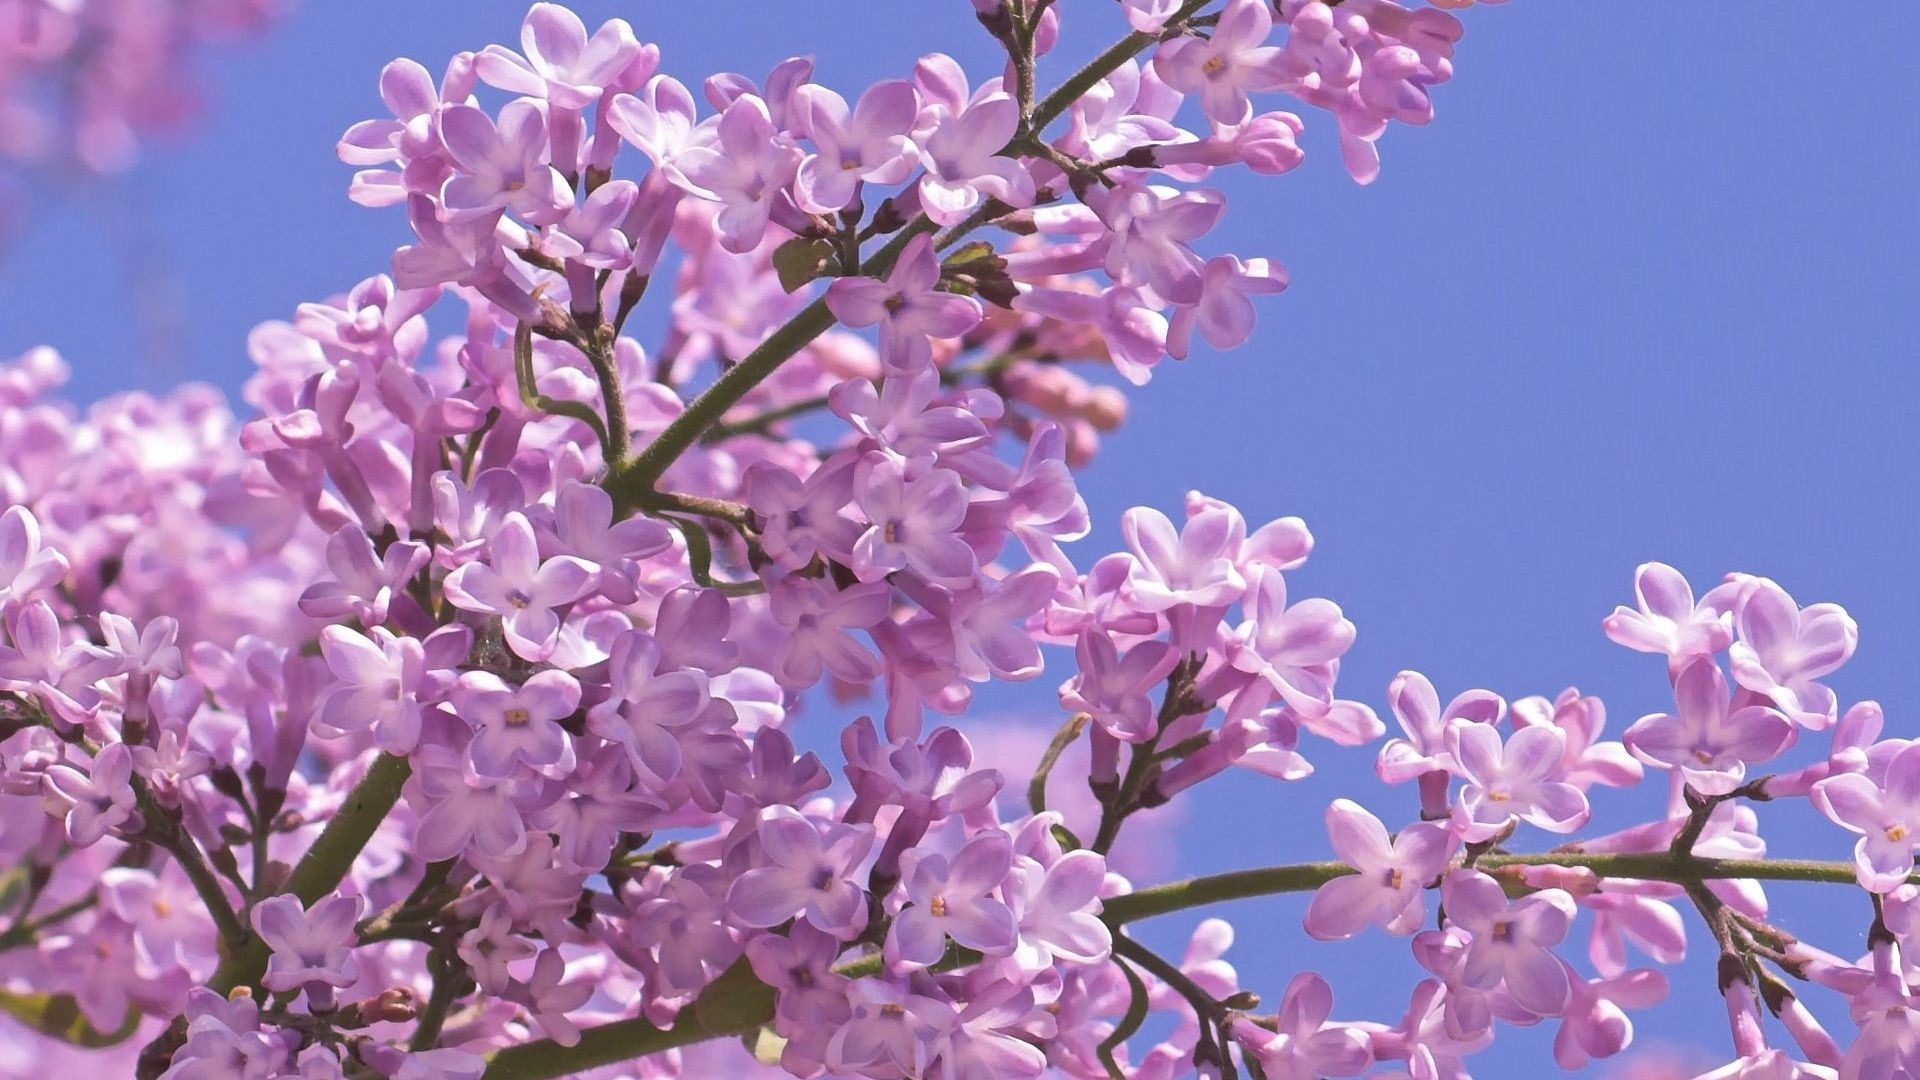 1920x1080 Gallery for Lilac Tree. Images for Gt Lilac Tree Wallpaper